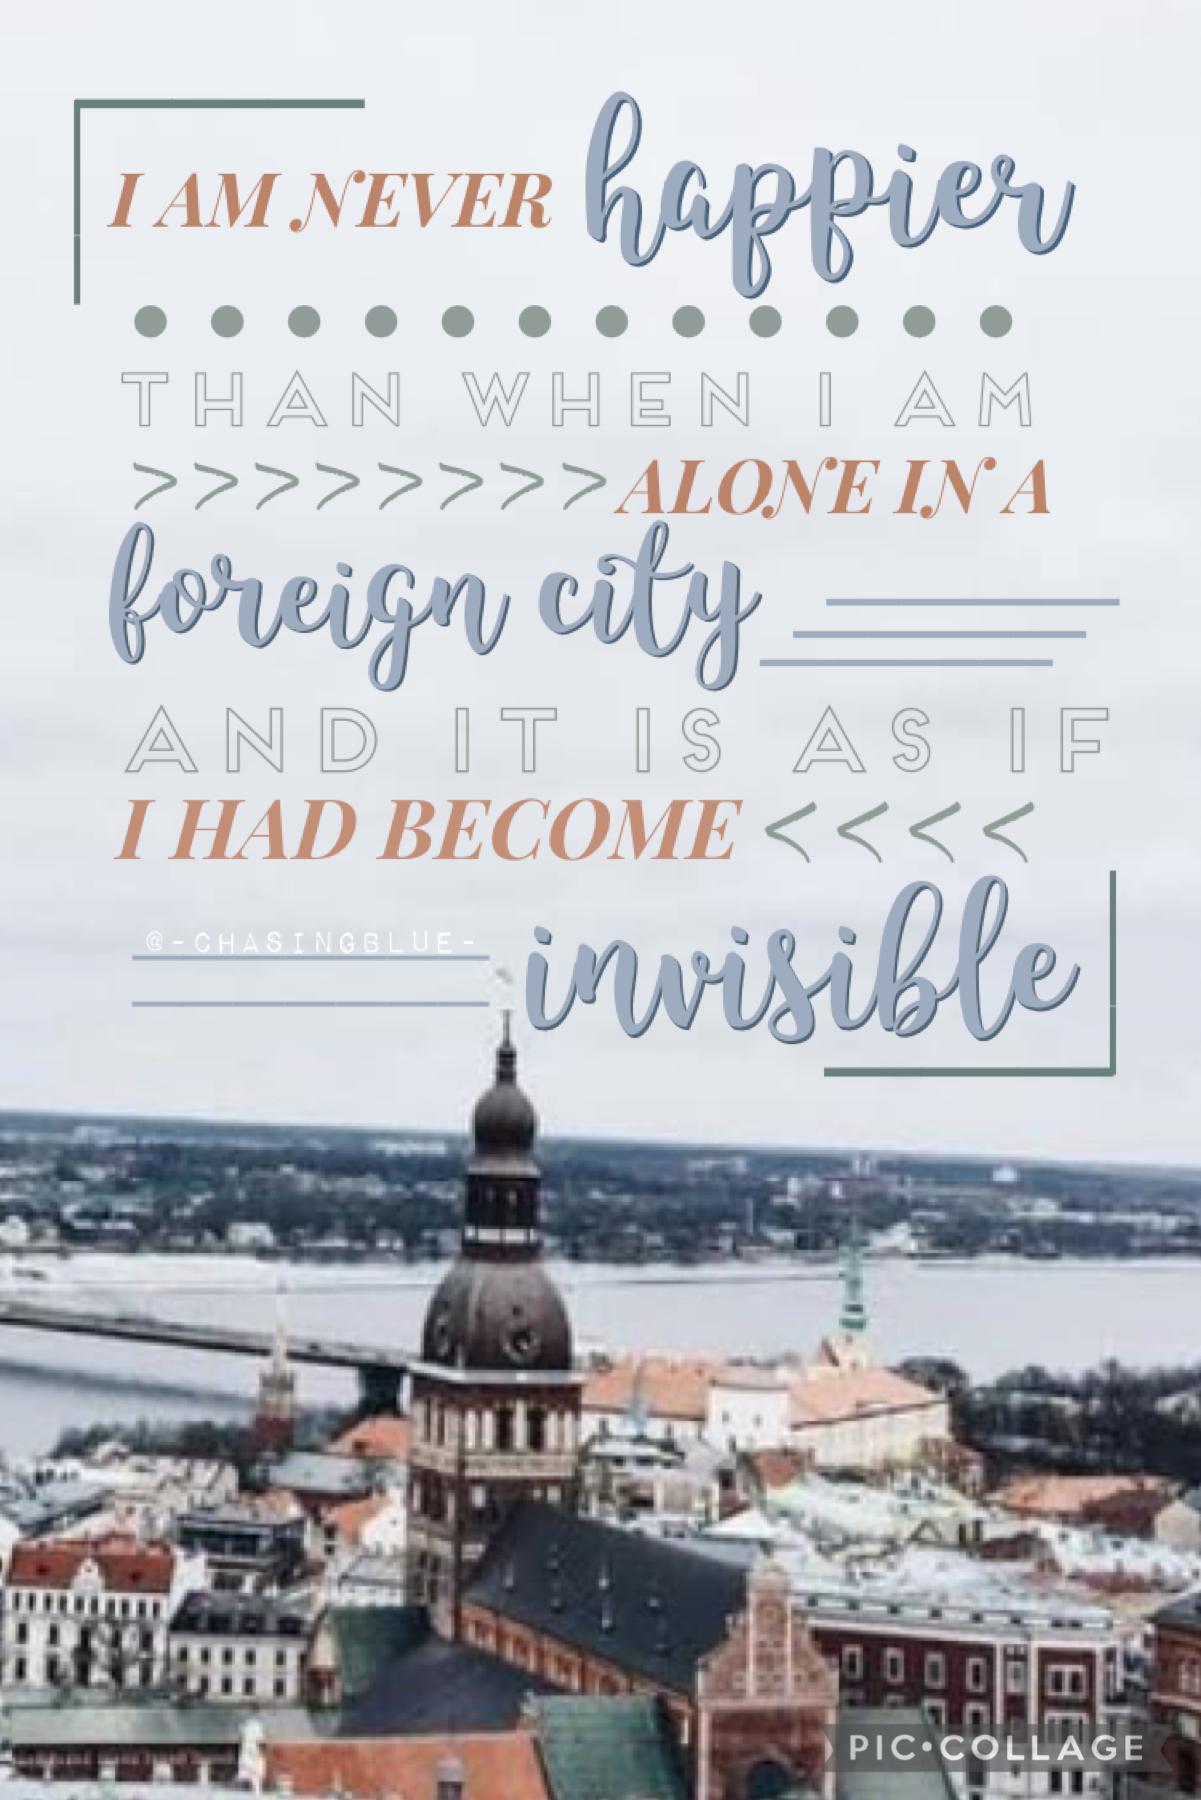 Inspo by -OceanBreeze-! It’s a really lovely text style and a really great quote! 5/5!